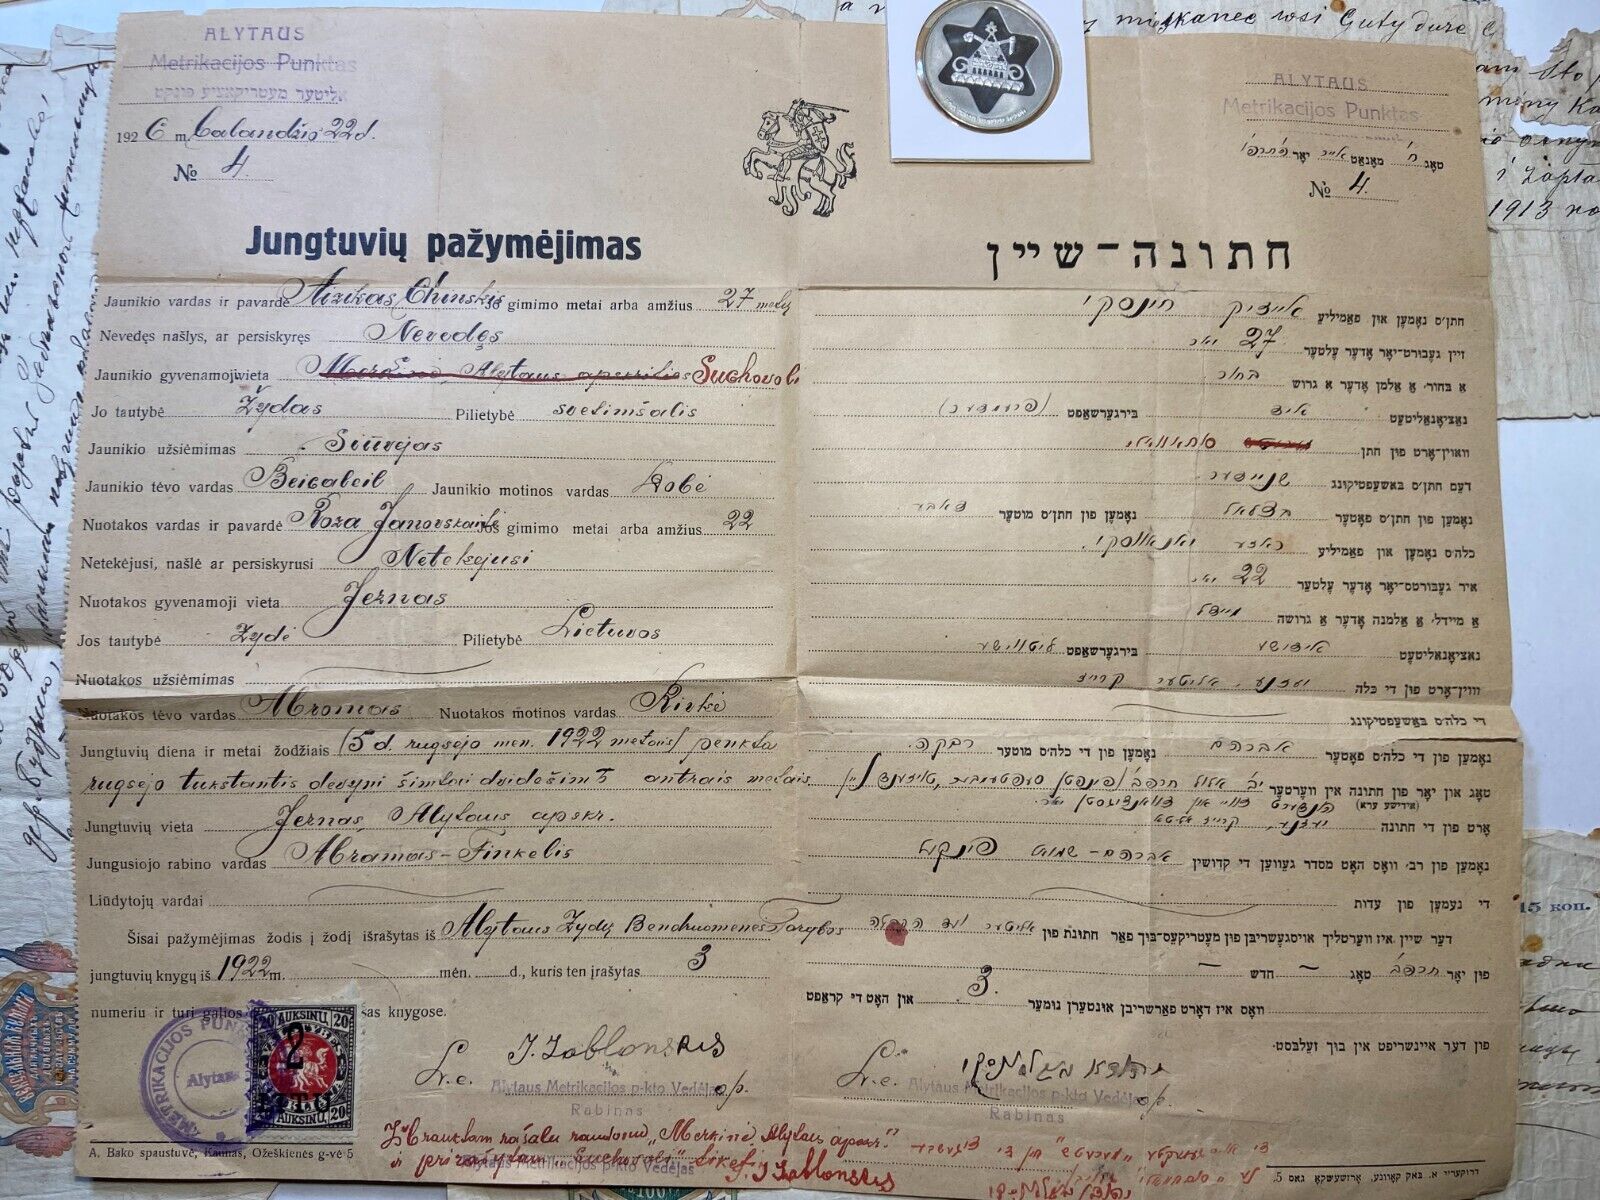 MARRIAGE DOCUMENT 1922